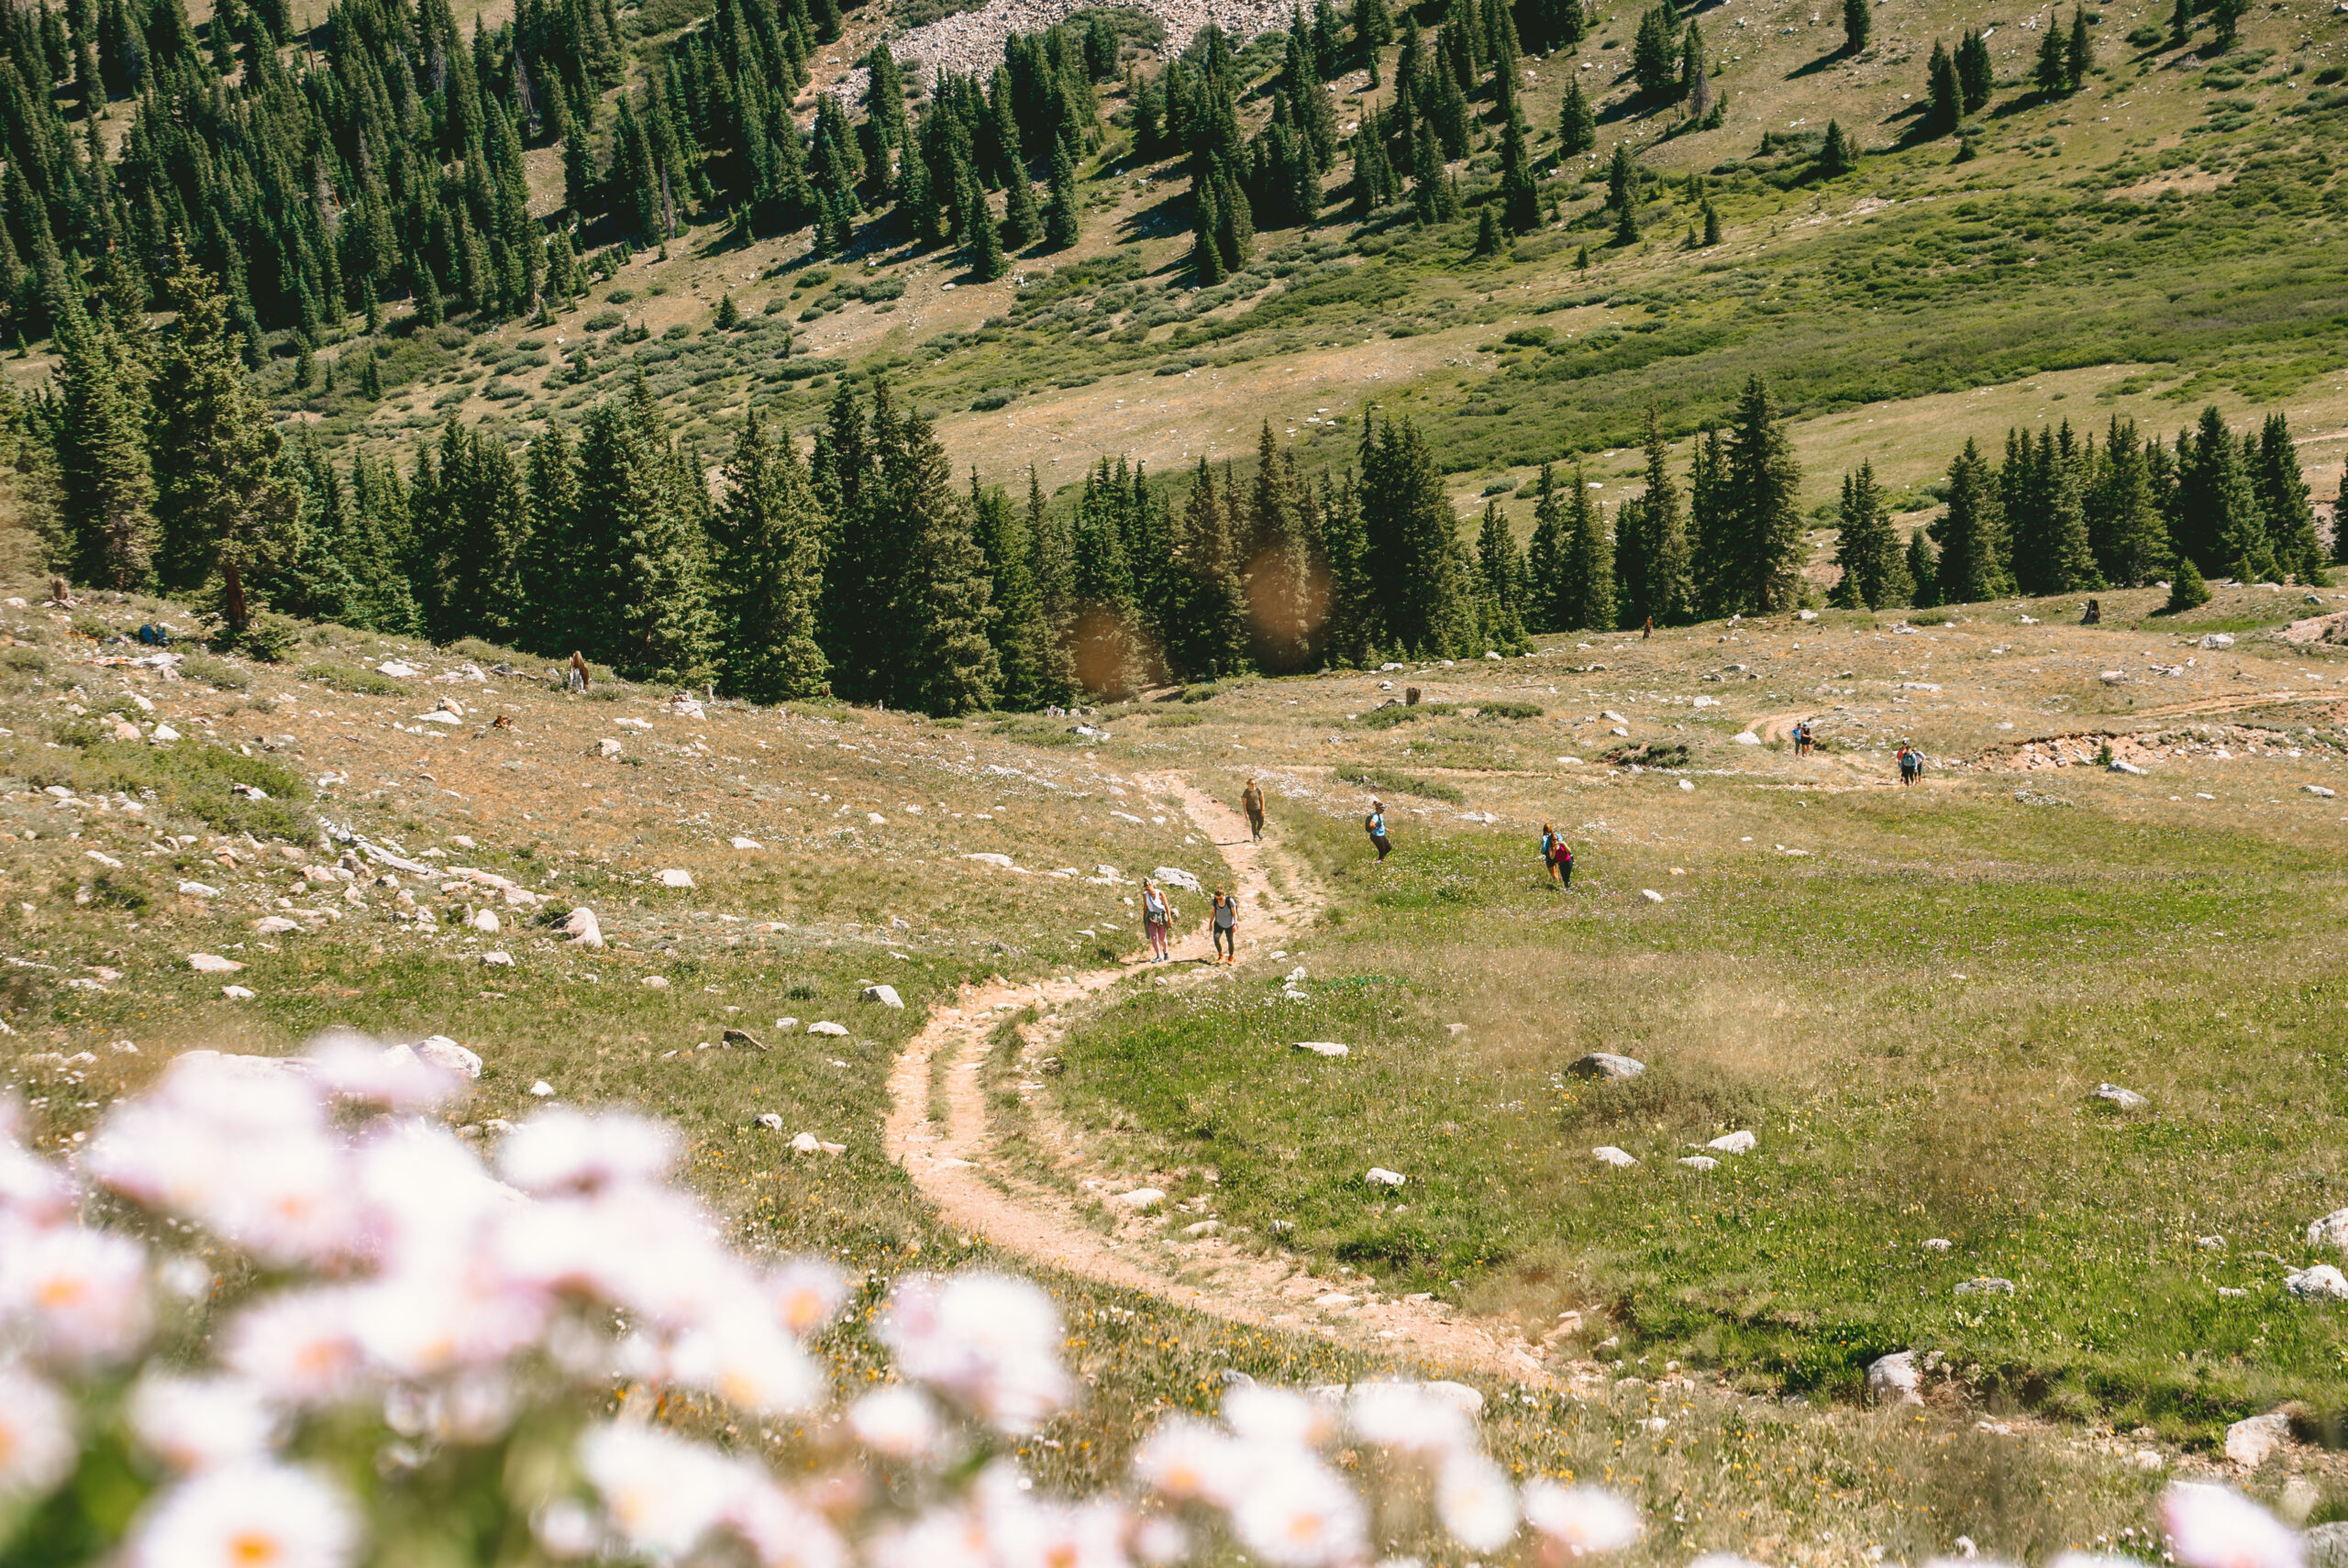 Wildflowers with a cascading trail behind